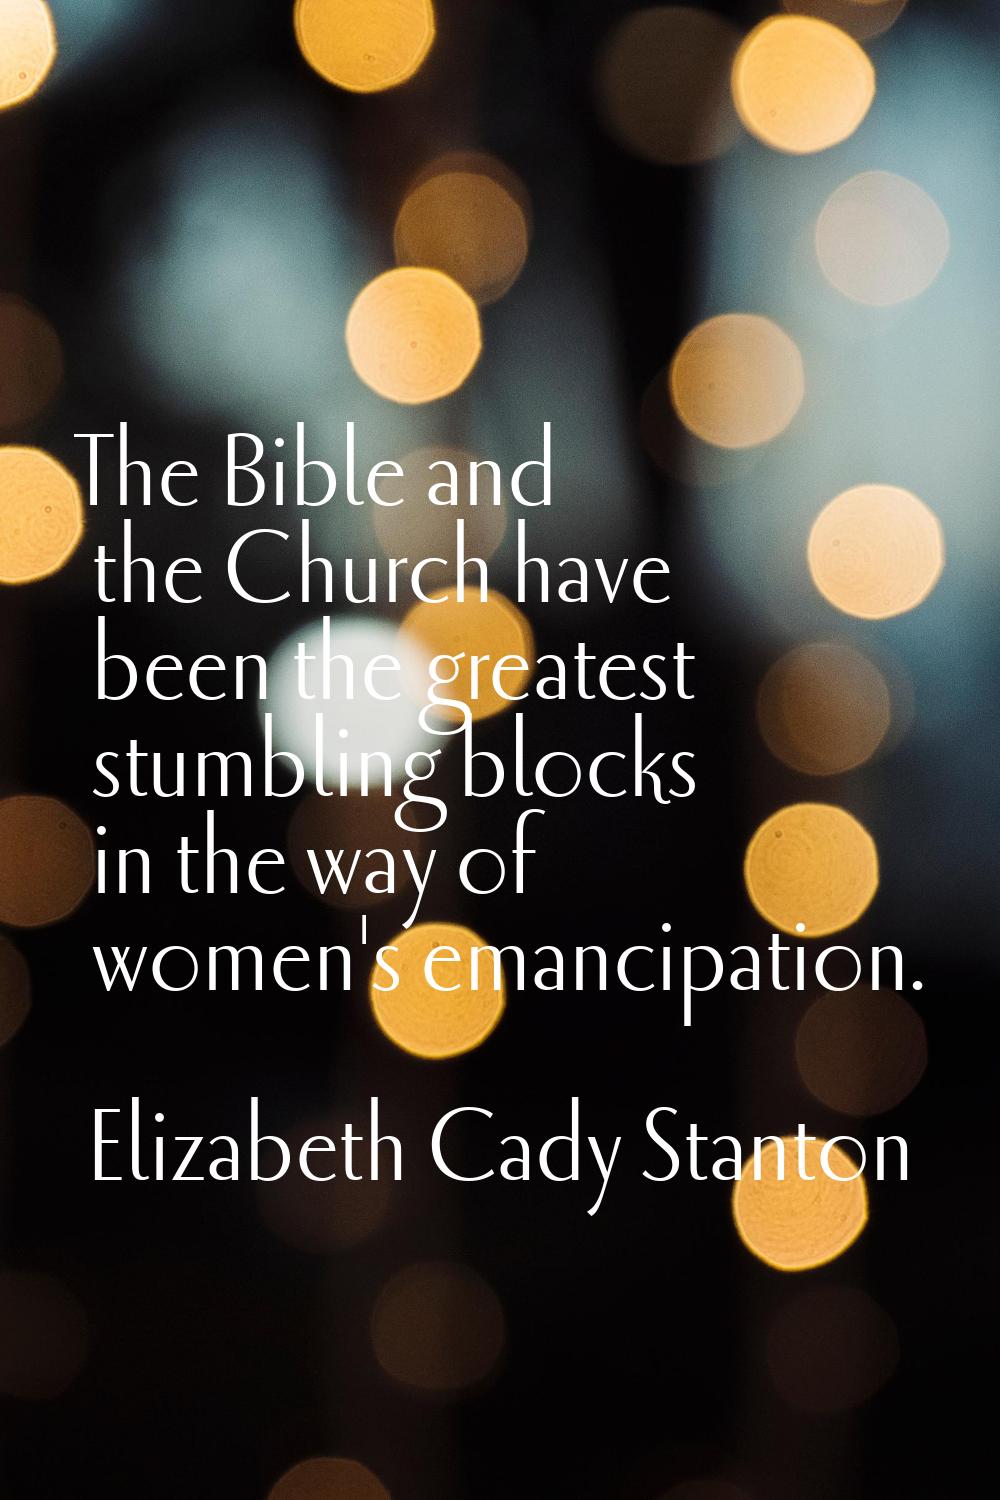 The Bible and the Church have been the greatest stumbling blocks in the way of women's emancipation